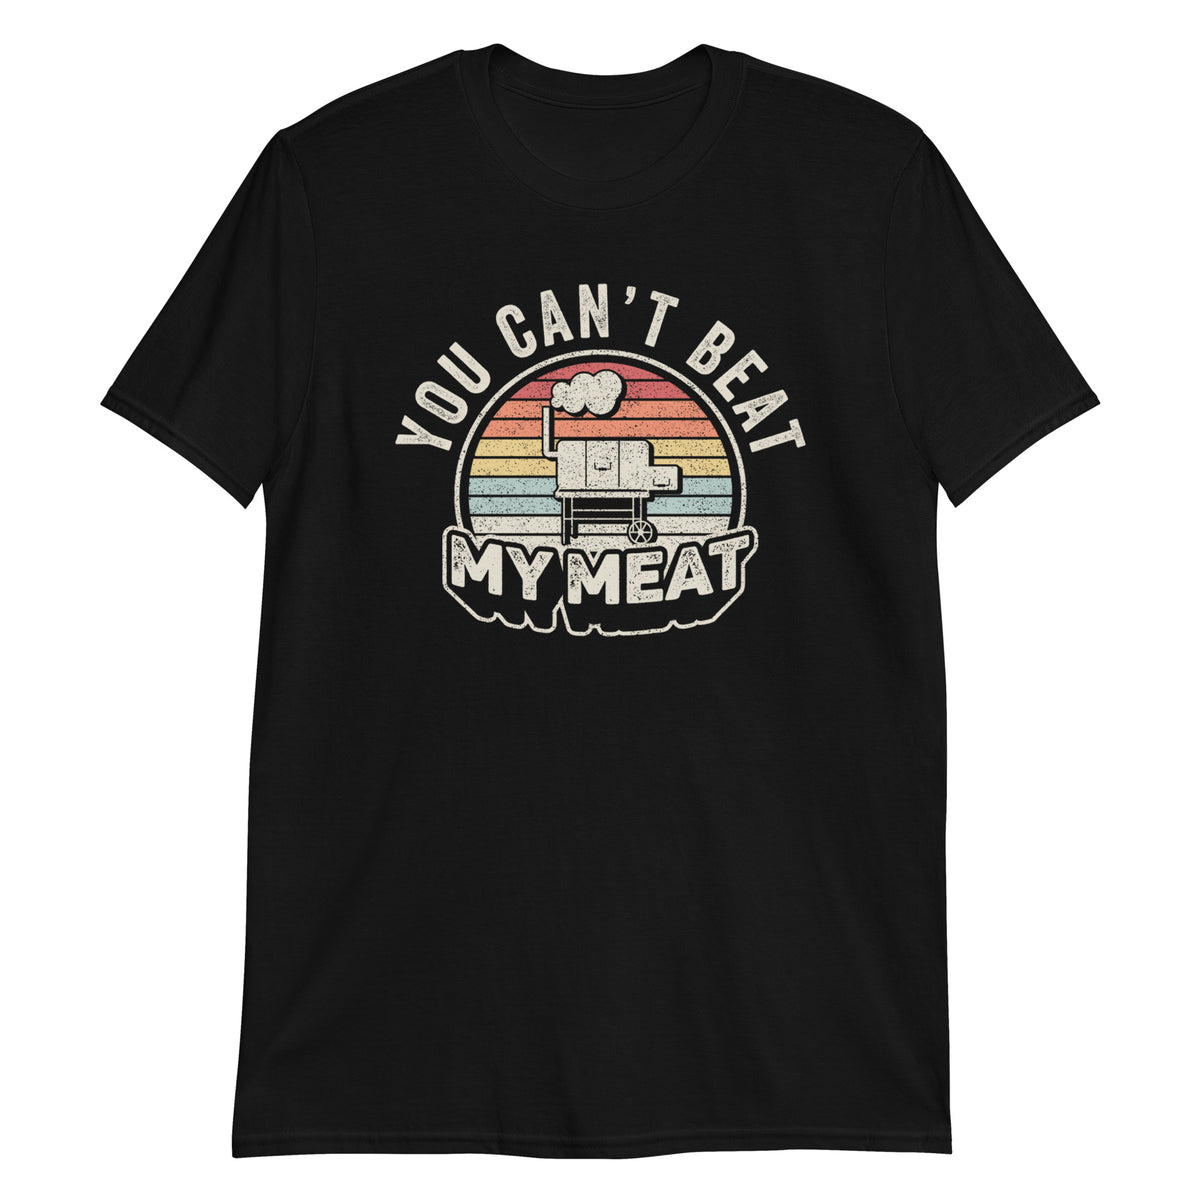 You Can't Beat My Meat  T-Shirt